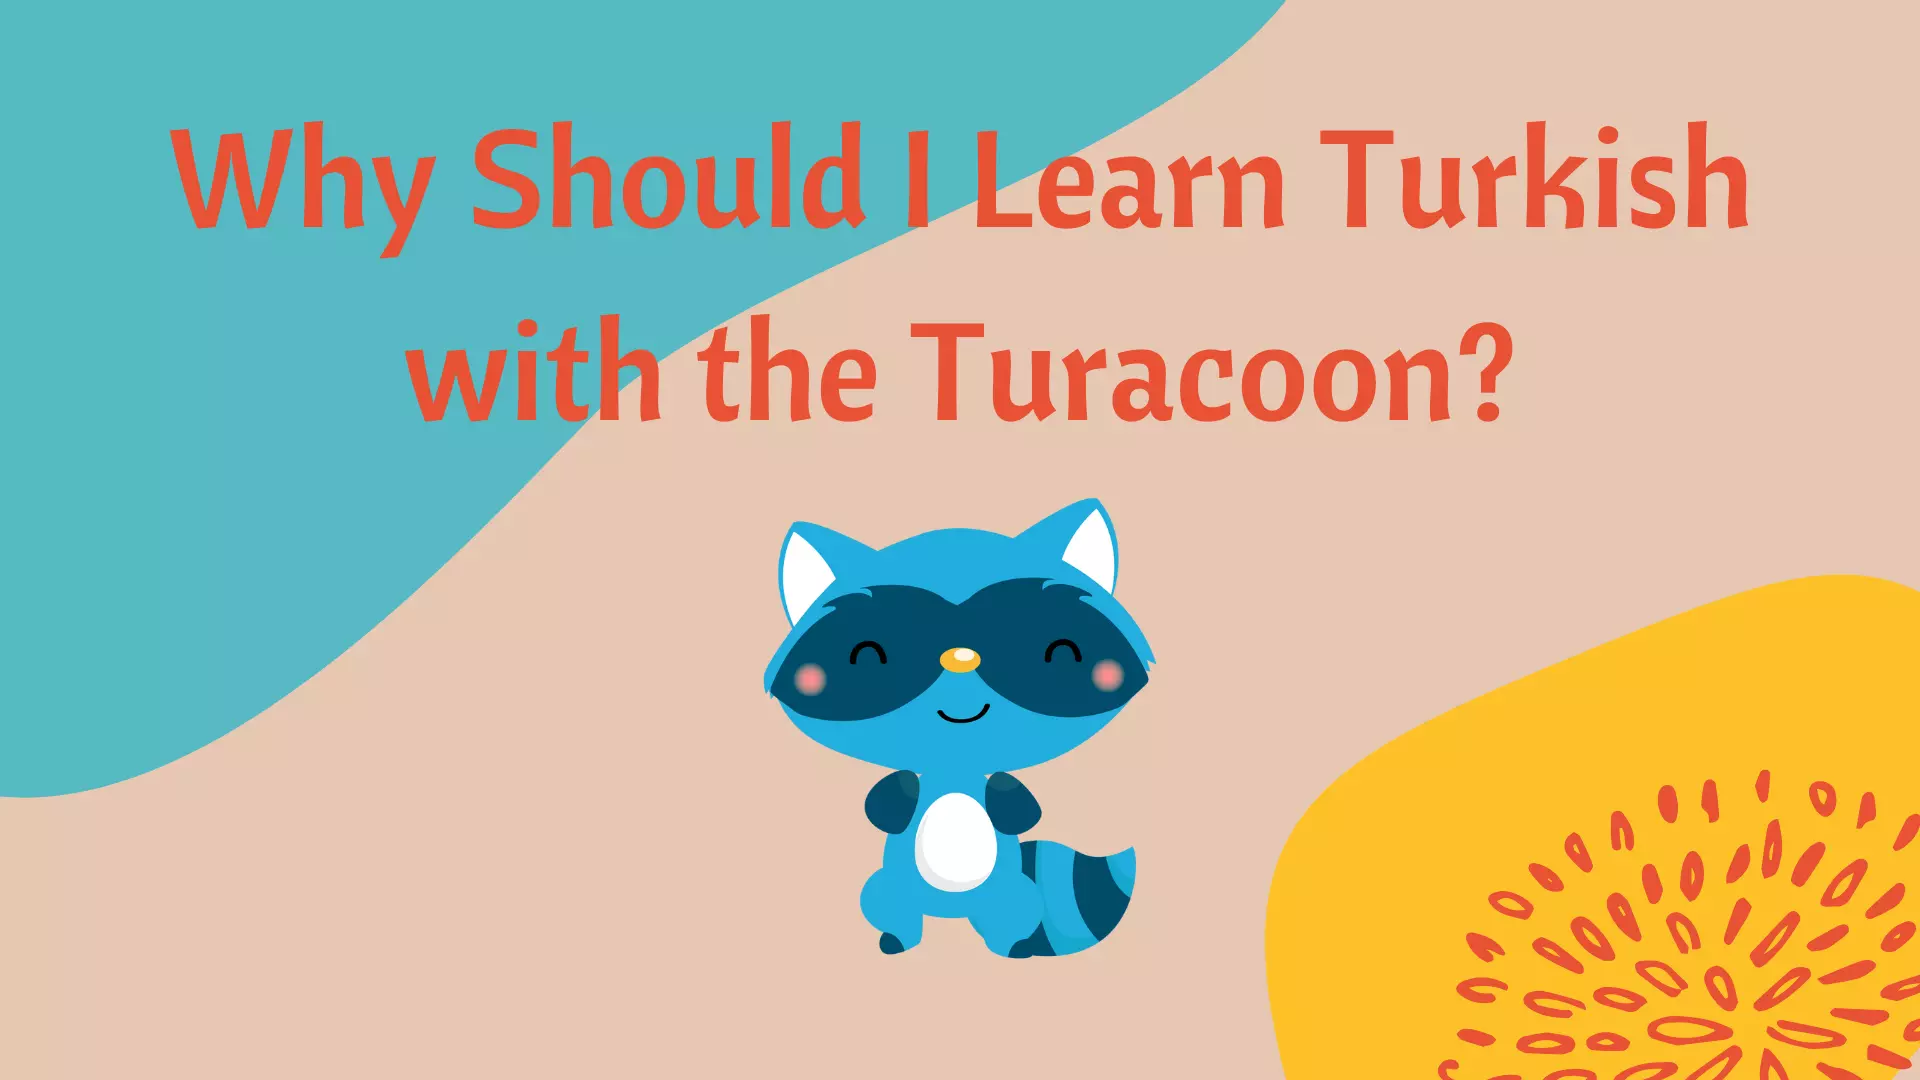 The Right Choice in Online Turkish Education: Turacoon